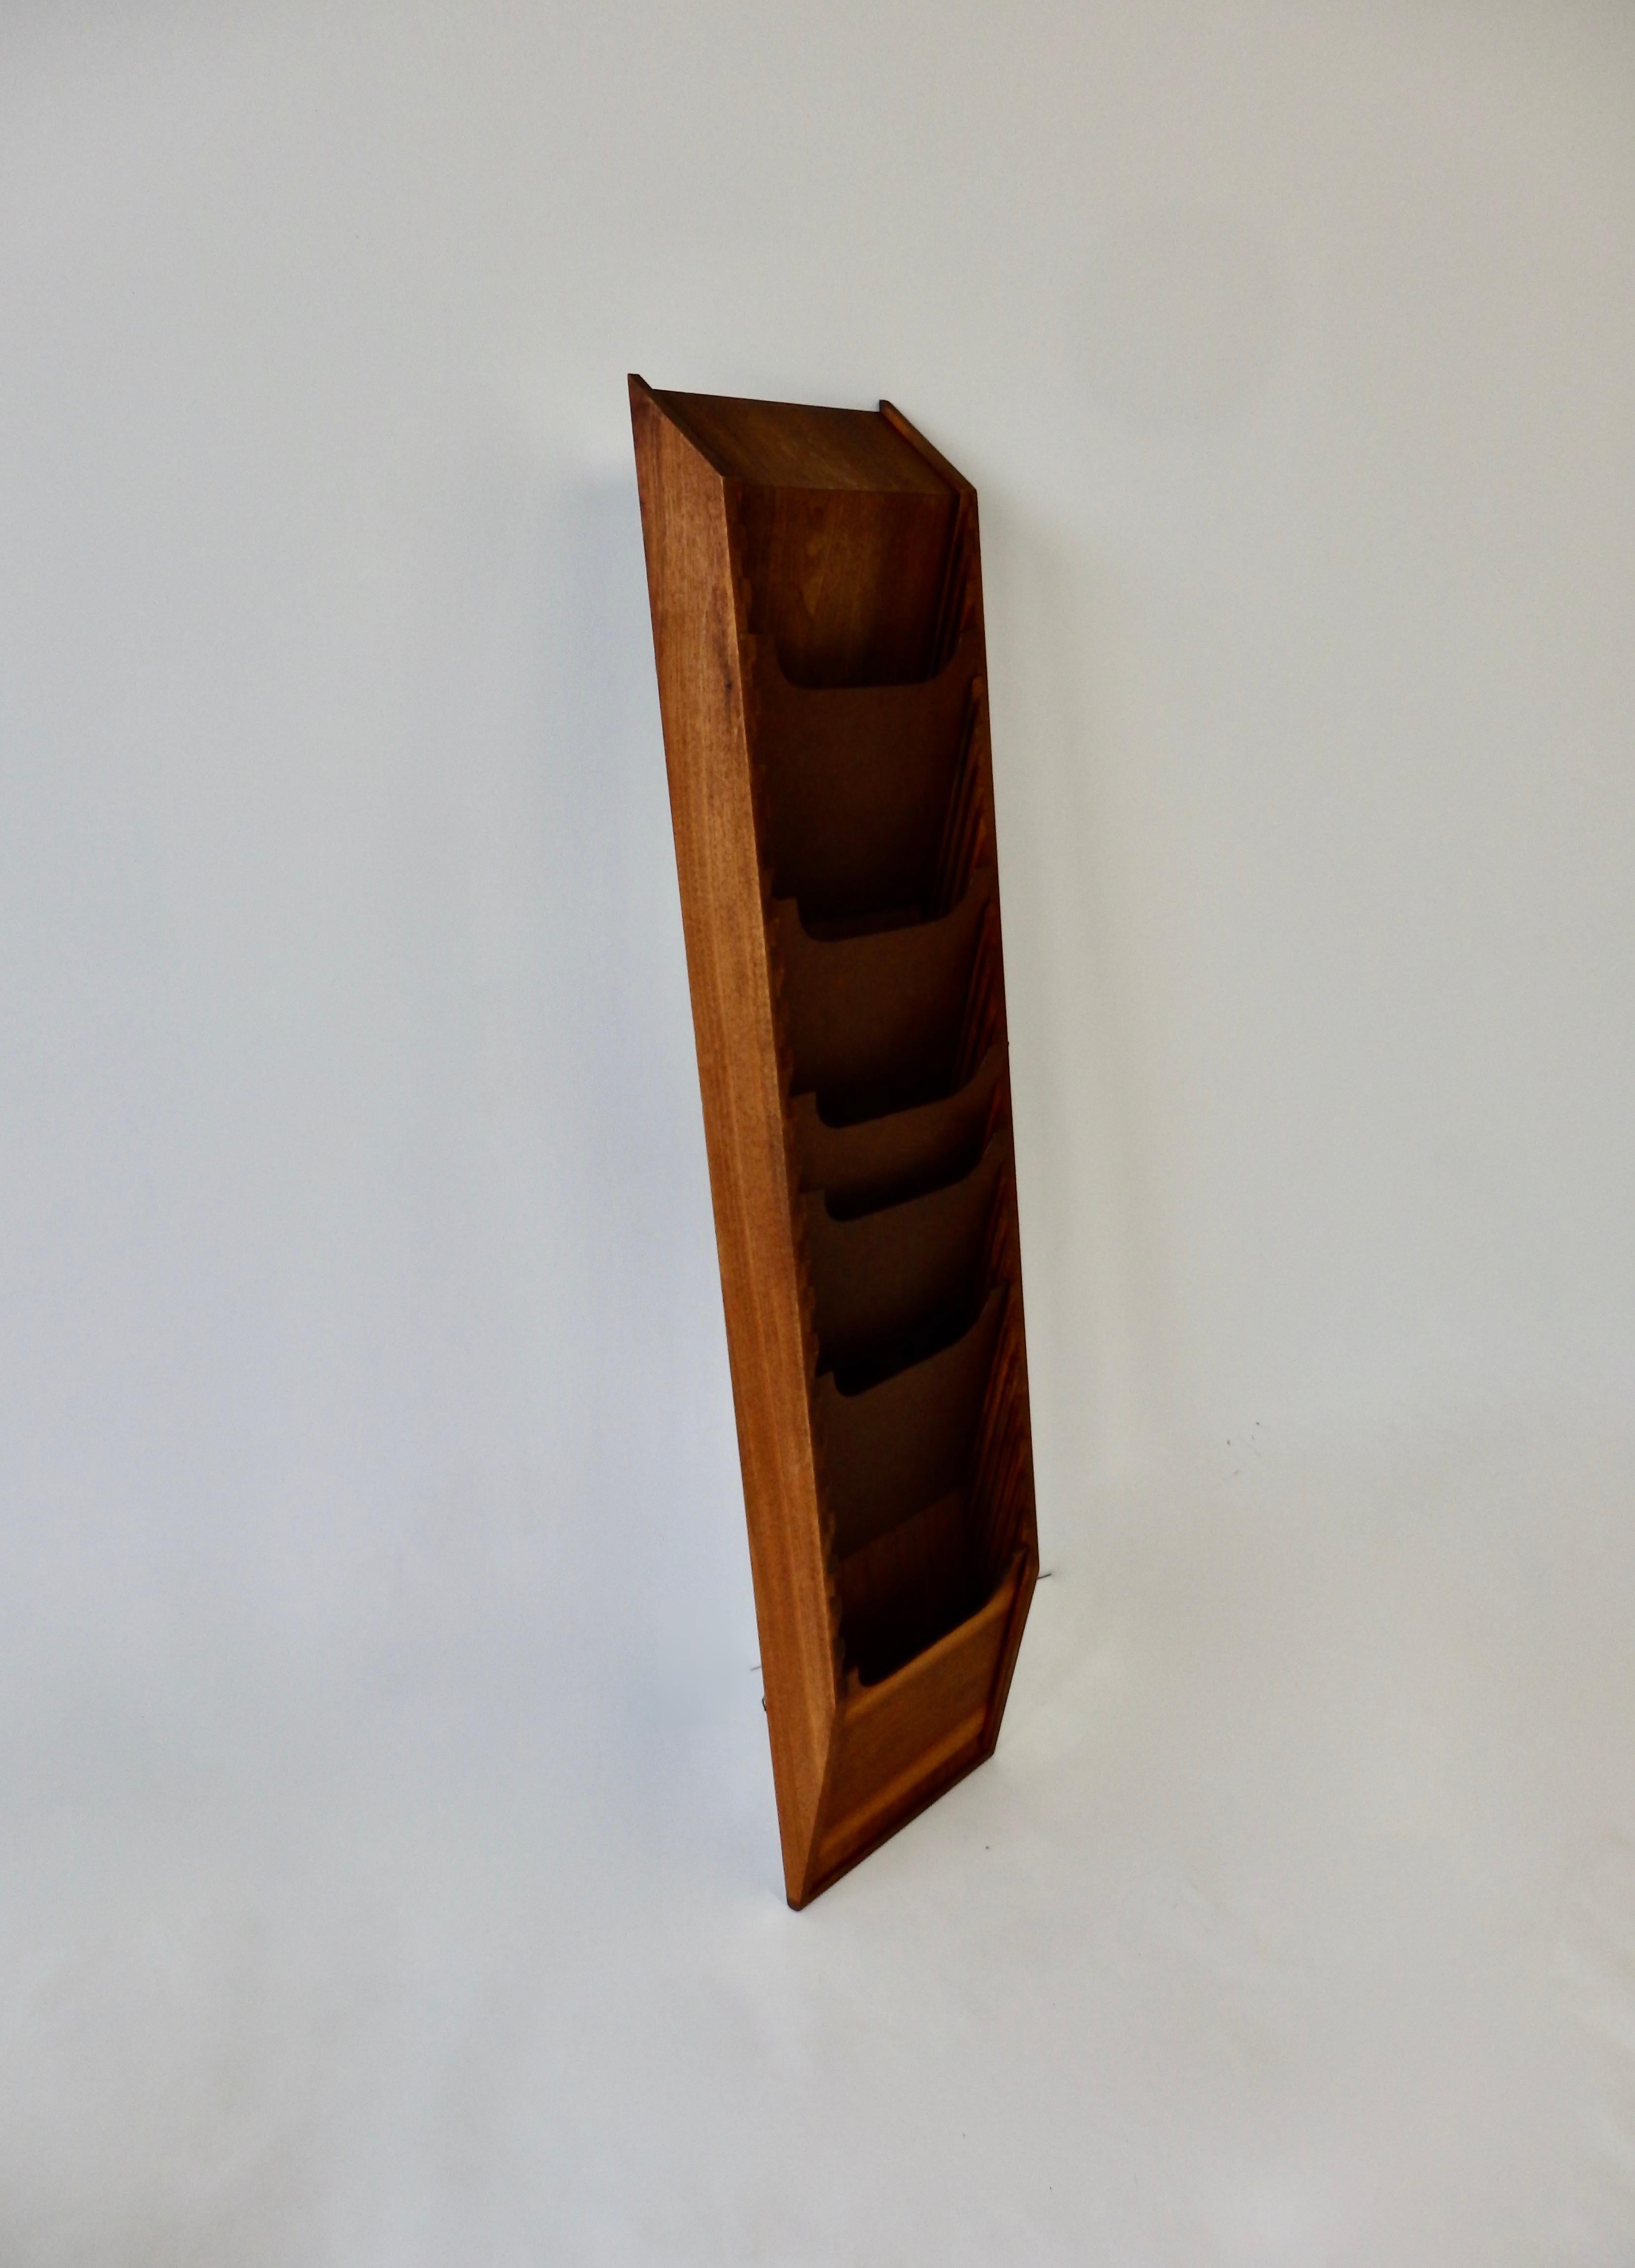 Wall mount walnut magazine display stand. Taller than most at almost five feet. Multiple Masonite adjustable dividers in dovetailed slats.